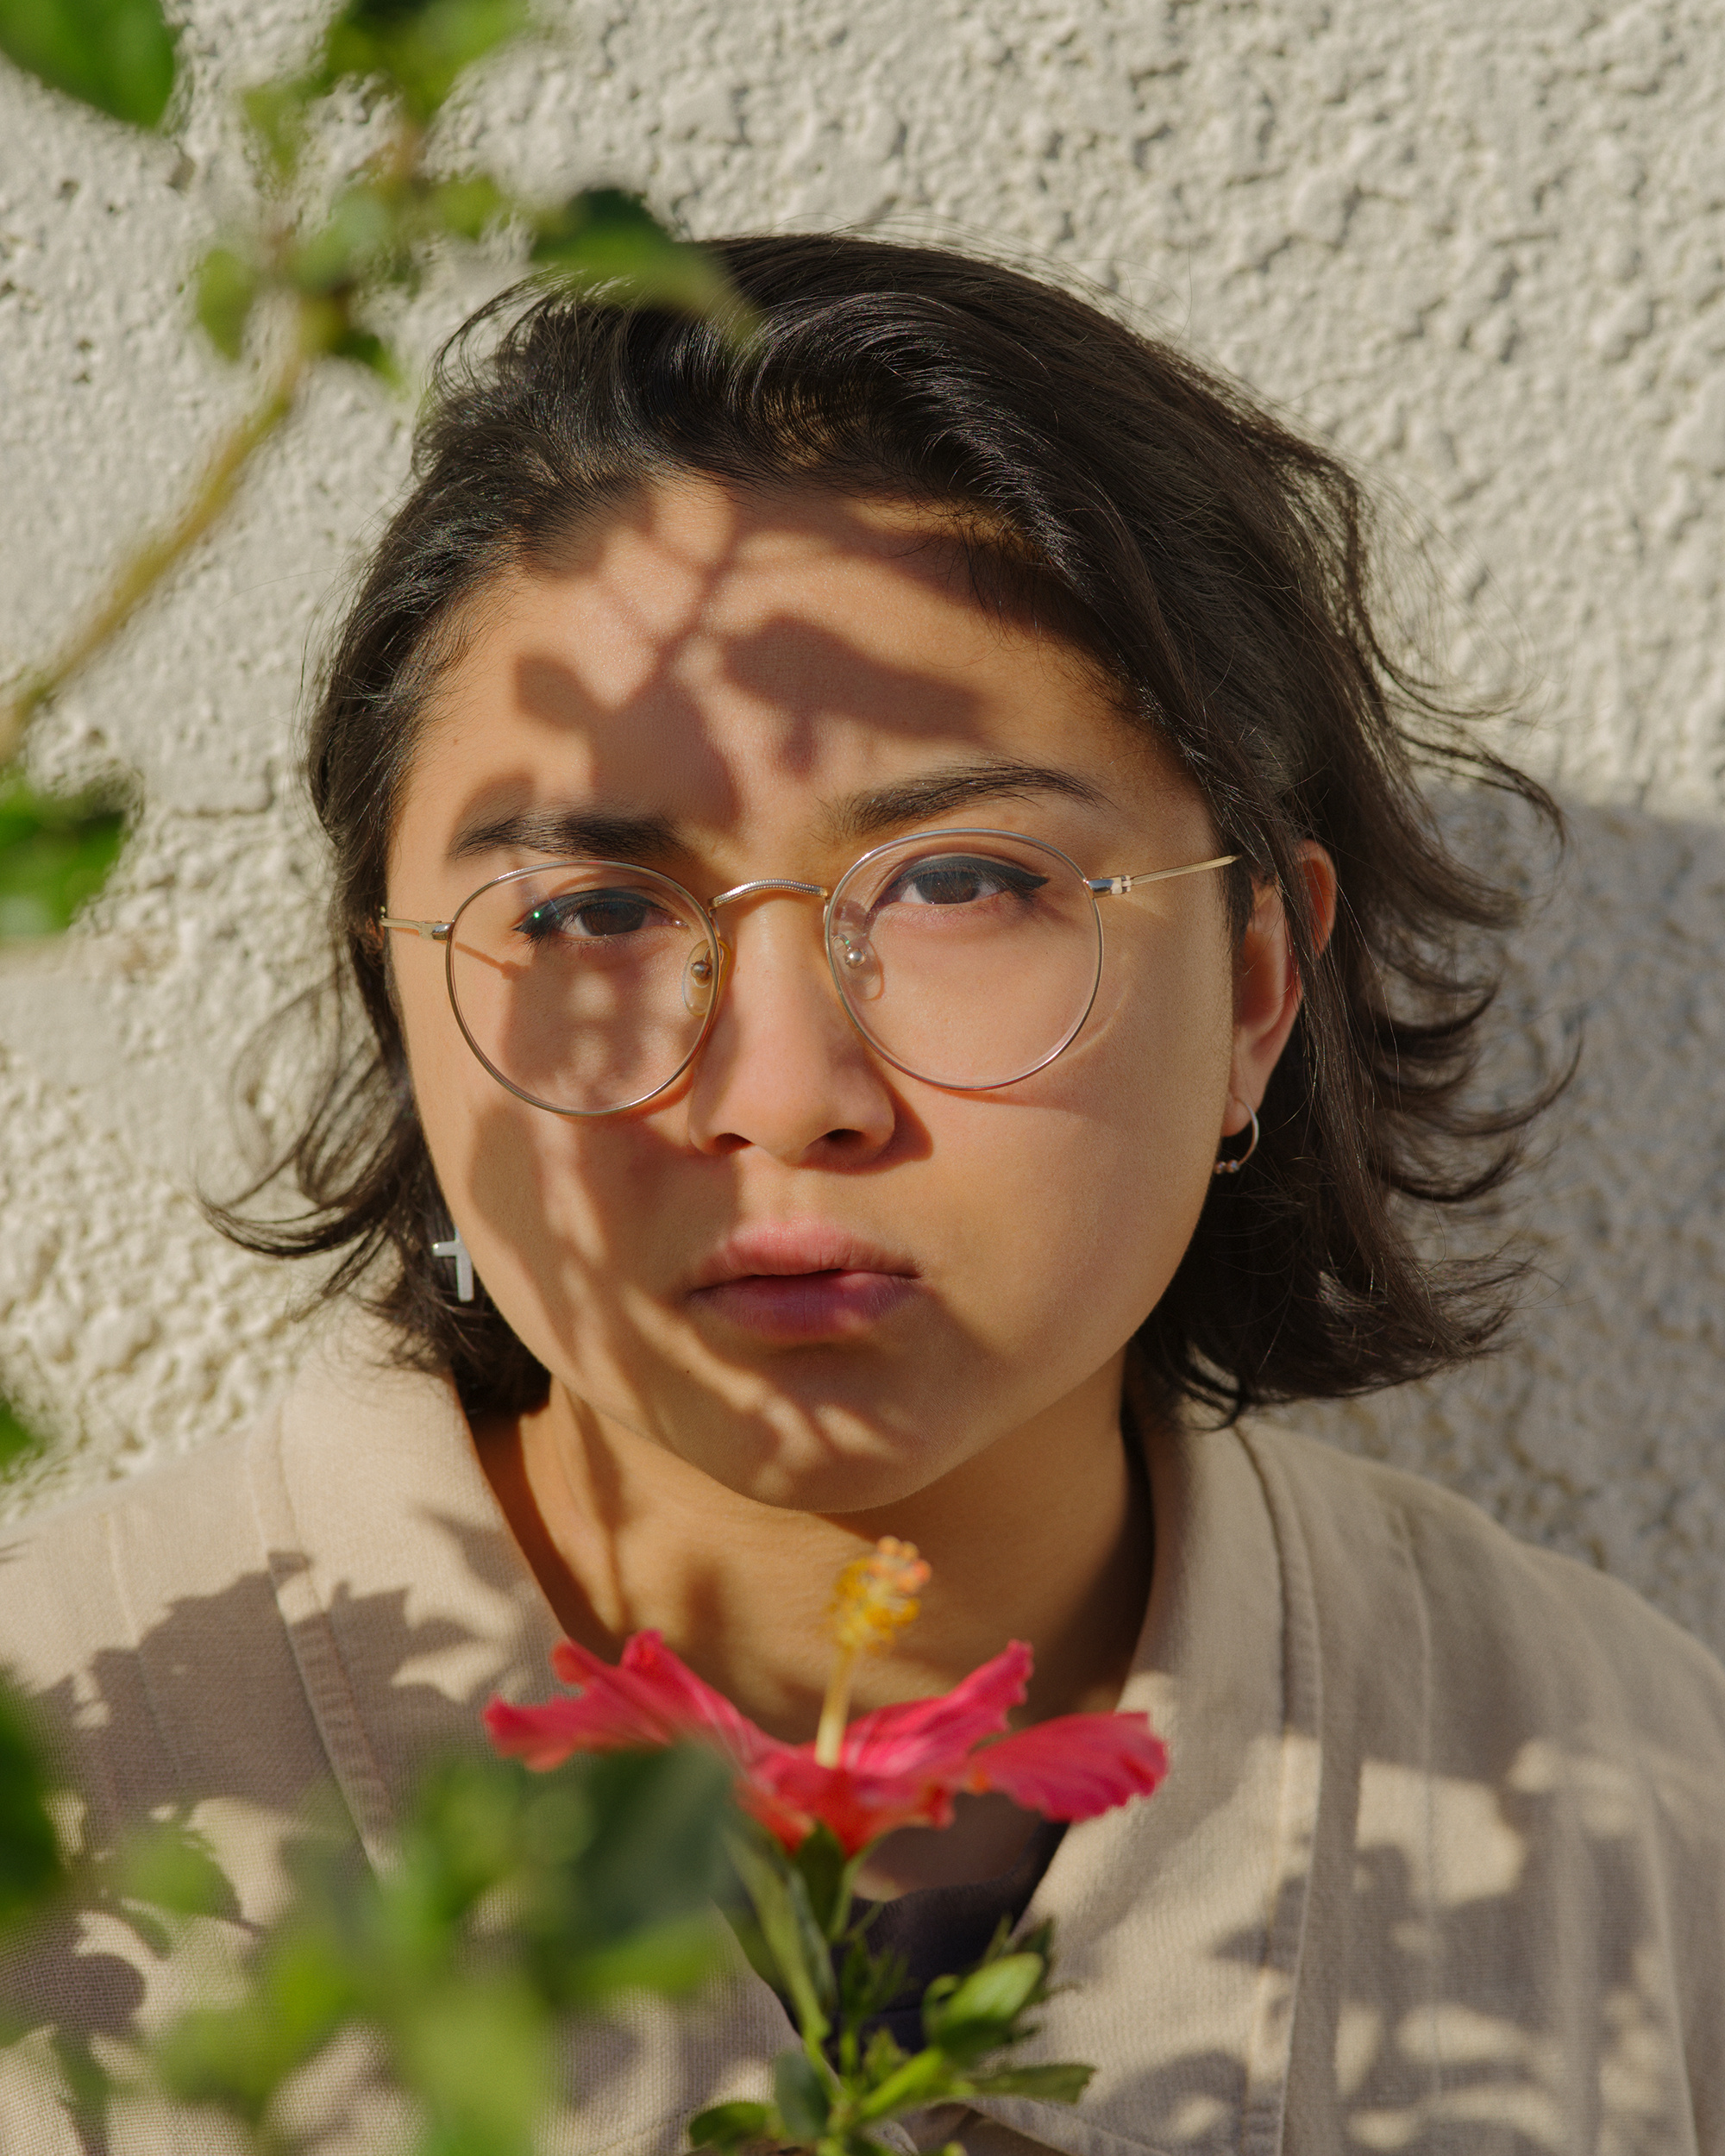 Jay Som Wallpapers (21+ images inside)